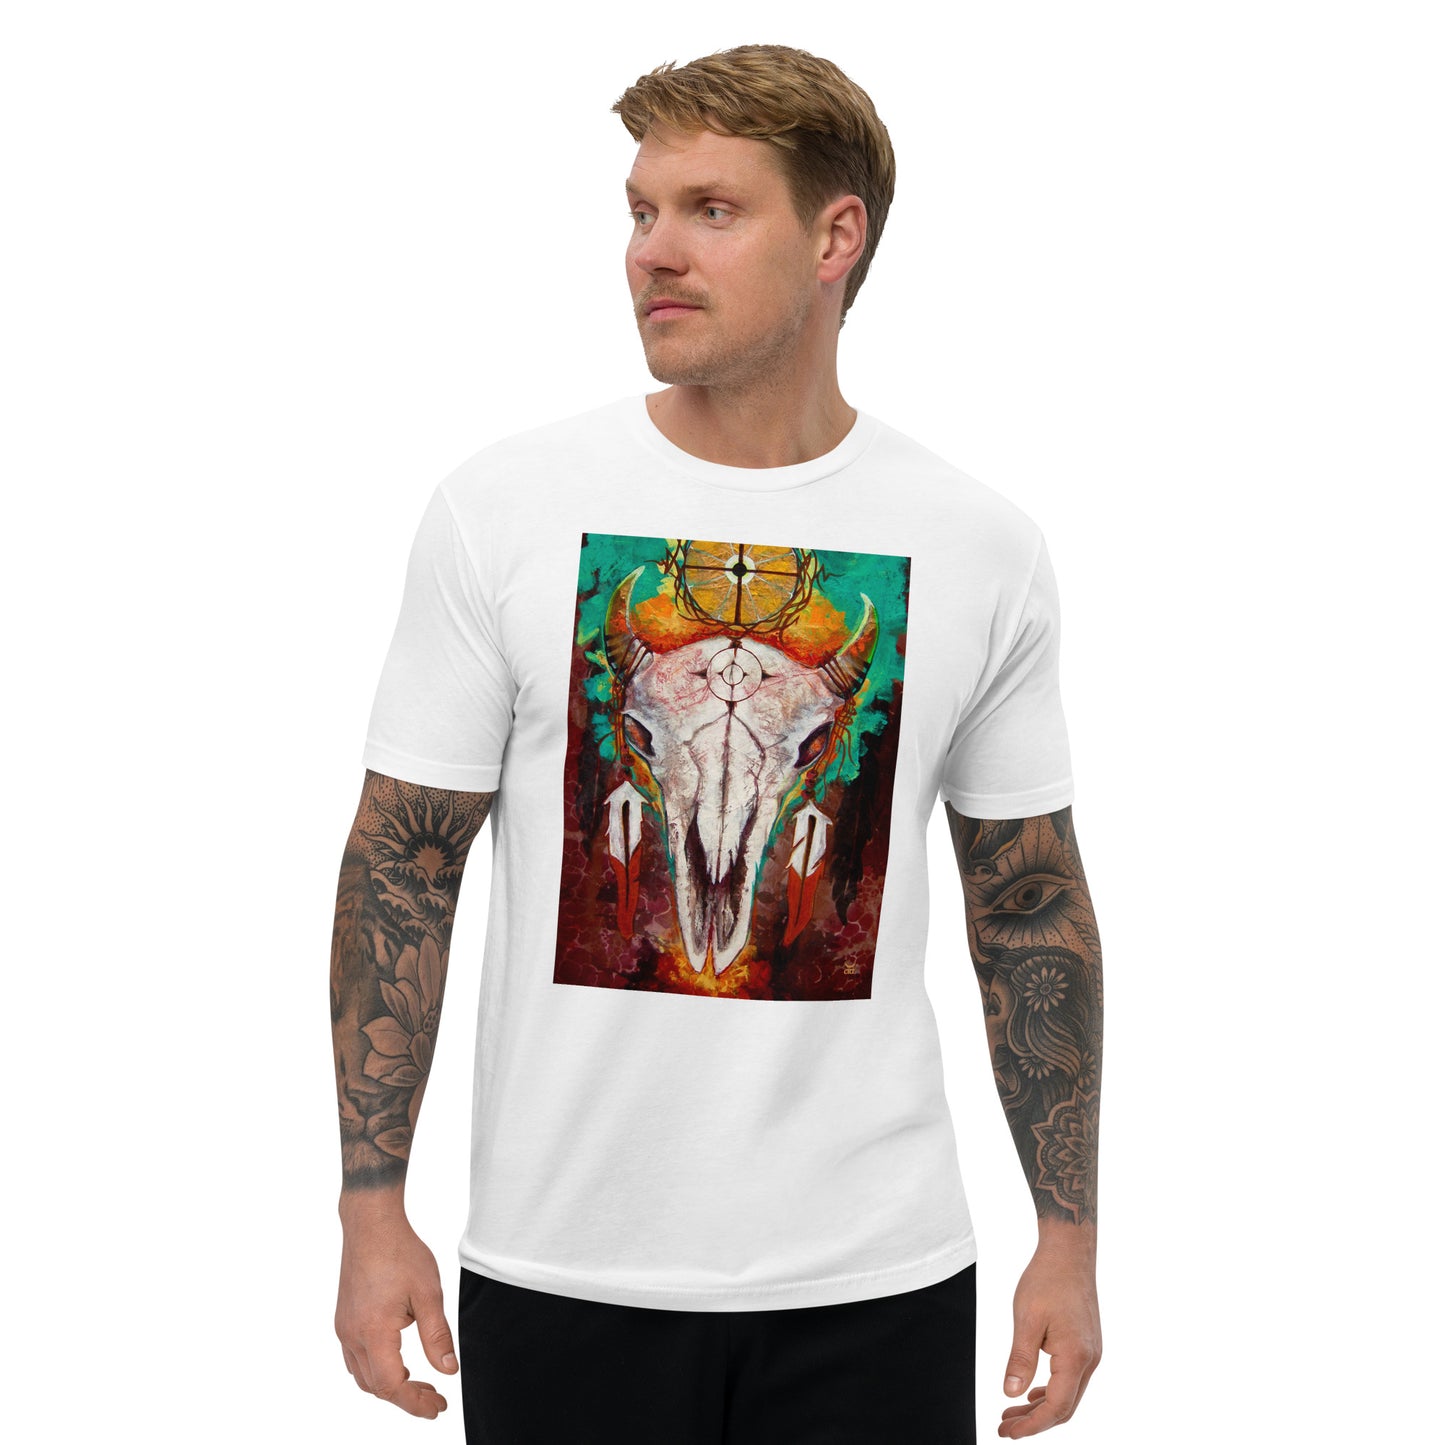 Large Skull - Men's Fitted Tee